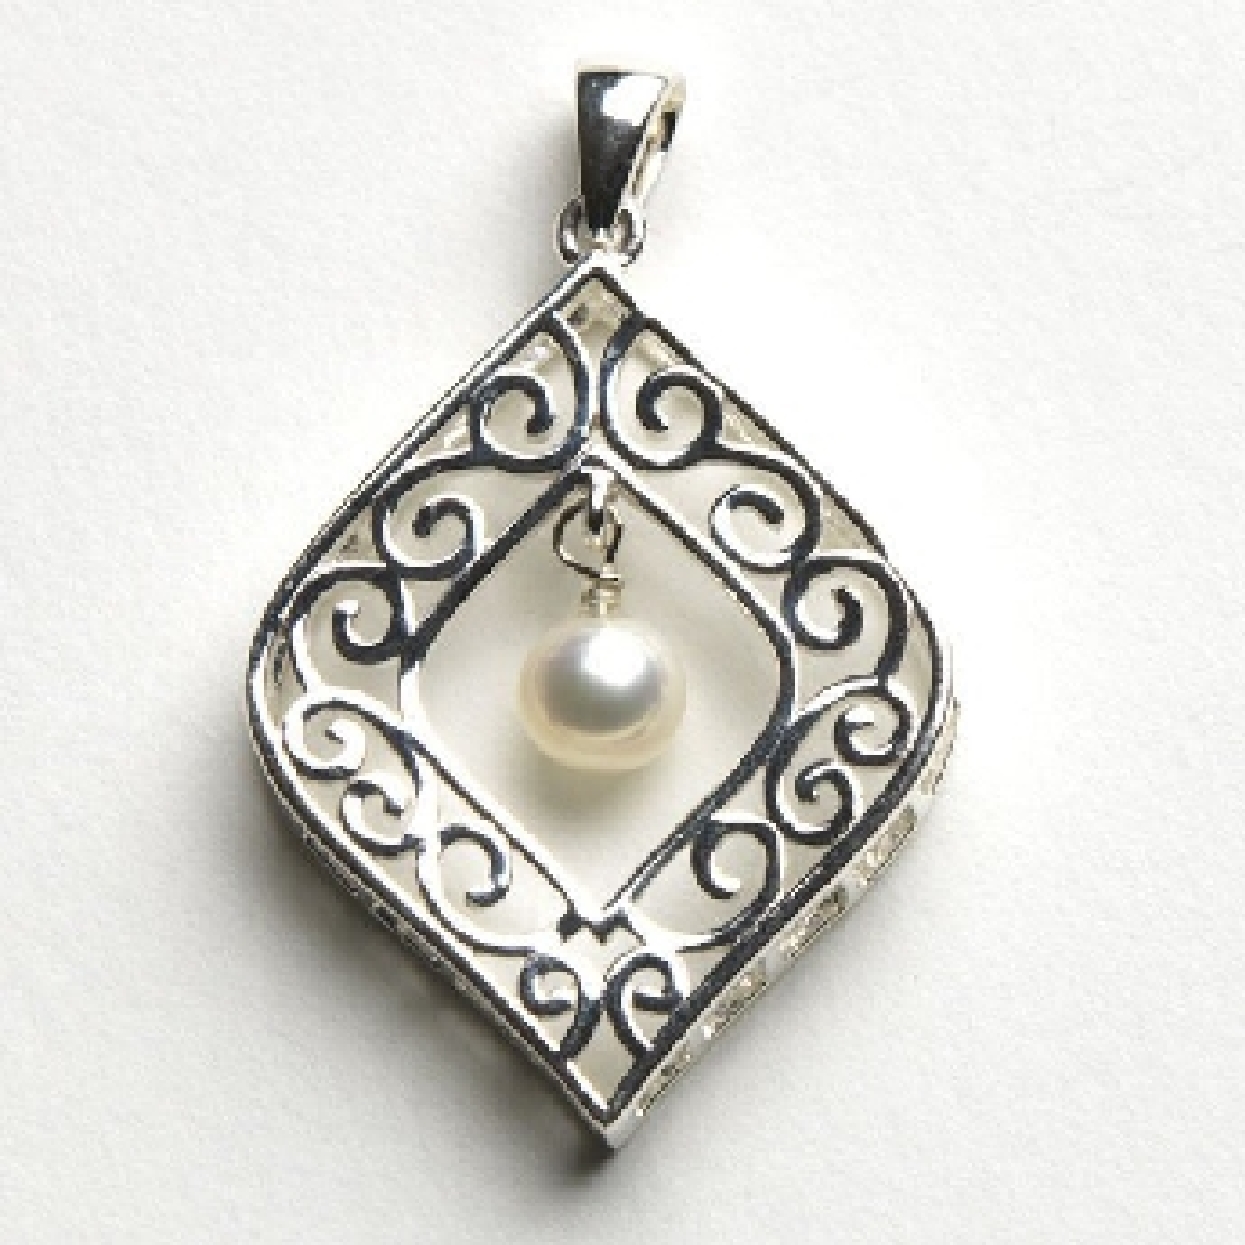 Sterling silver Southern Gates pendant with drop pearl.
P897